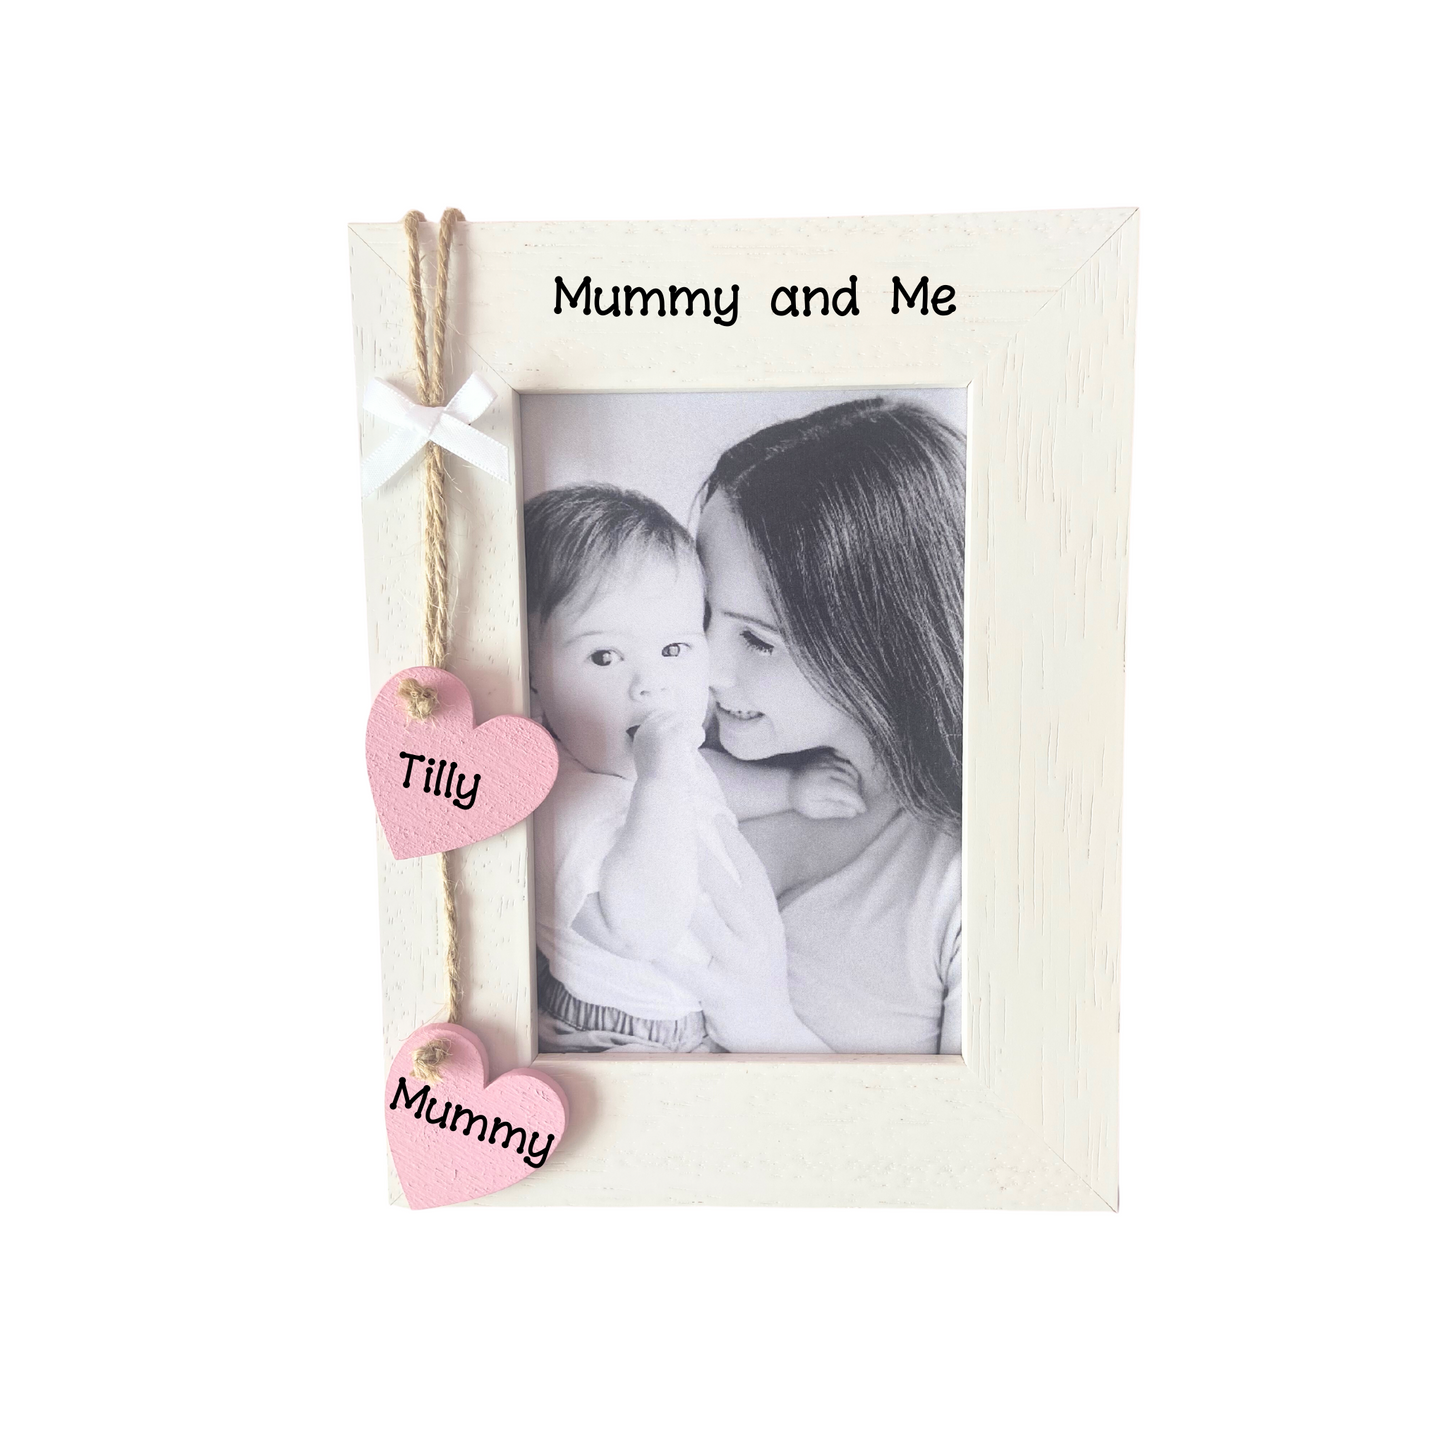 Image shows mummy and me photo frame, includes two hanging hearts with names and also small white bow above. Bling can be added.